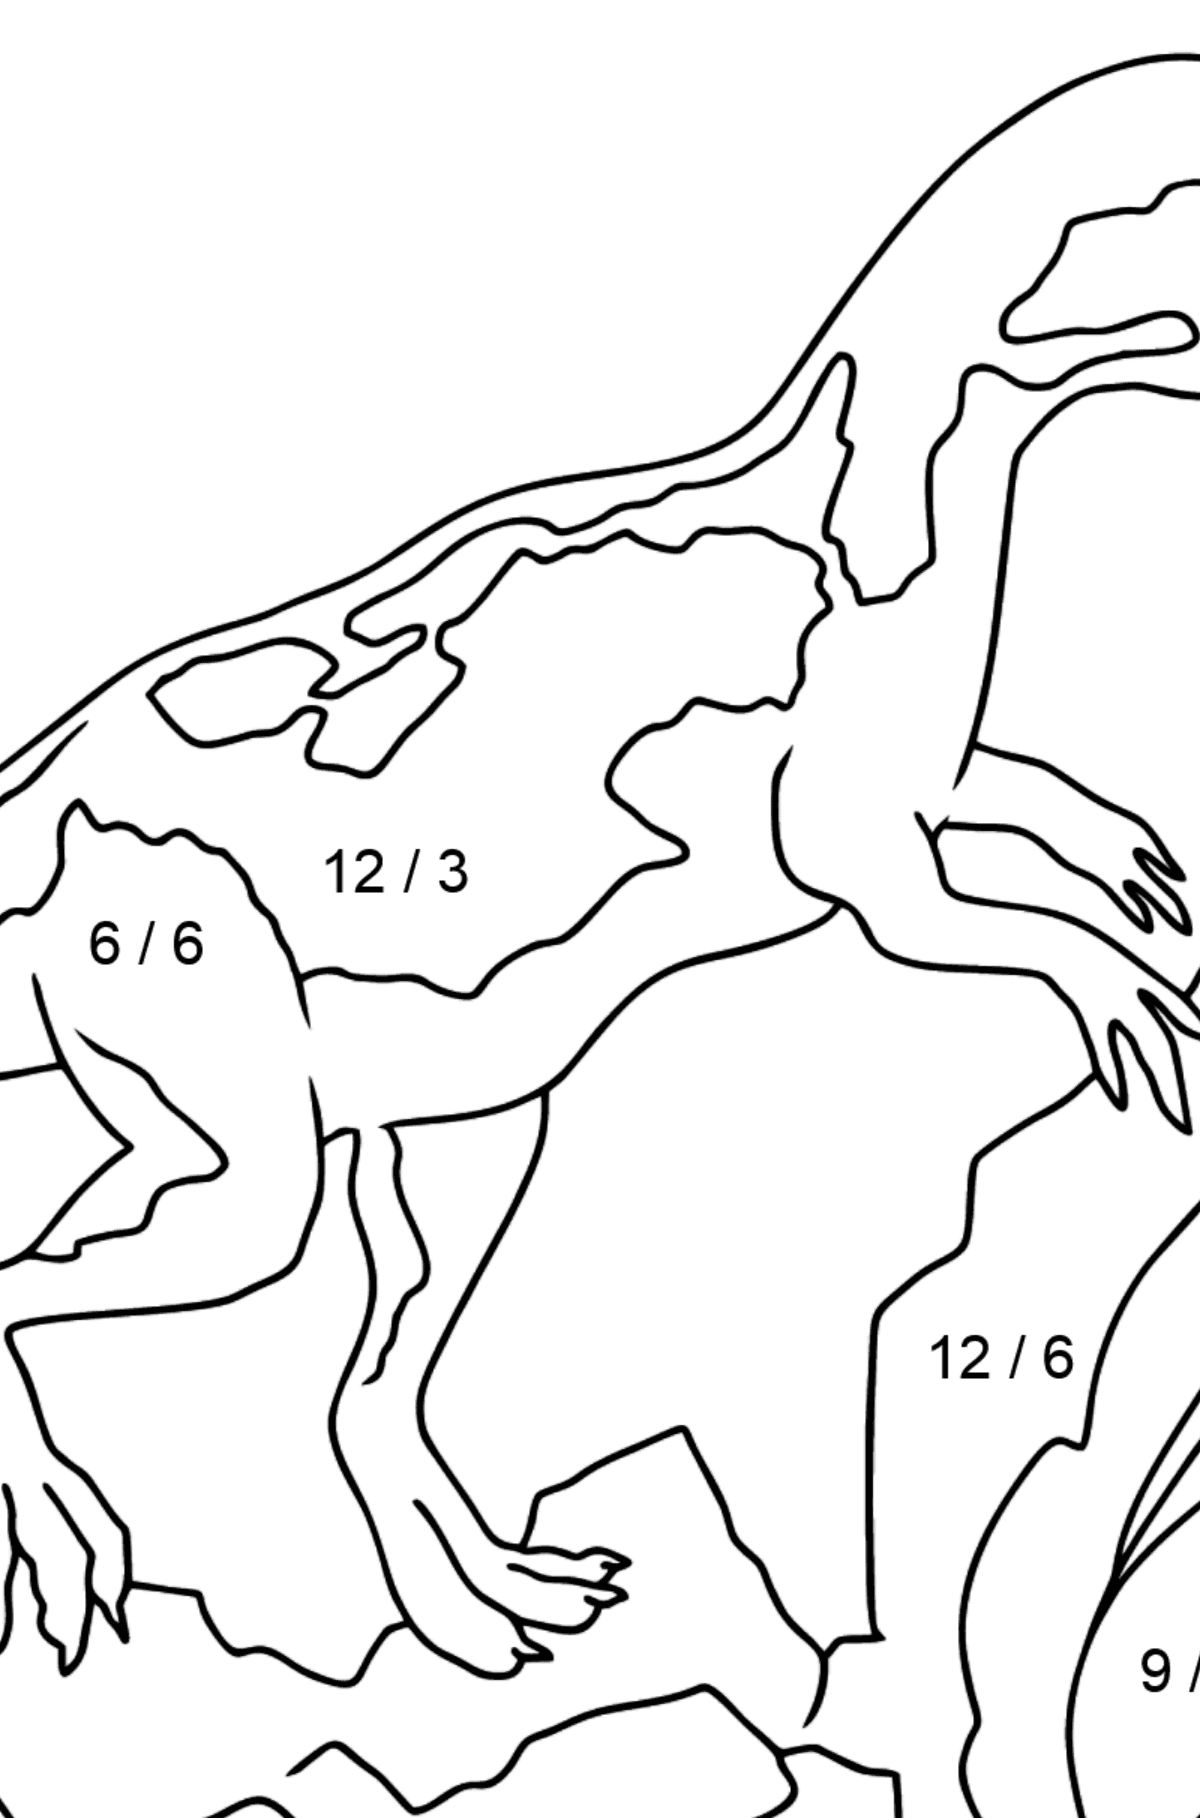 Coloring Page - A Dinosaur is Looking for Food - Math Coloring - Division for Kids